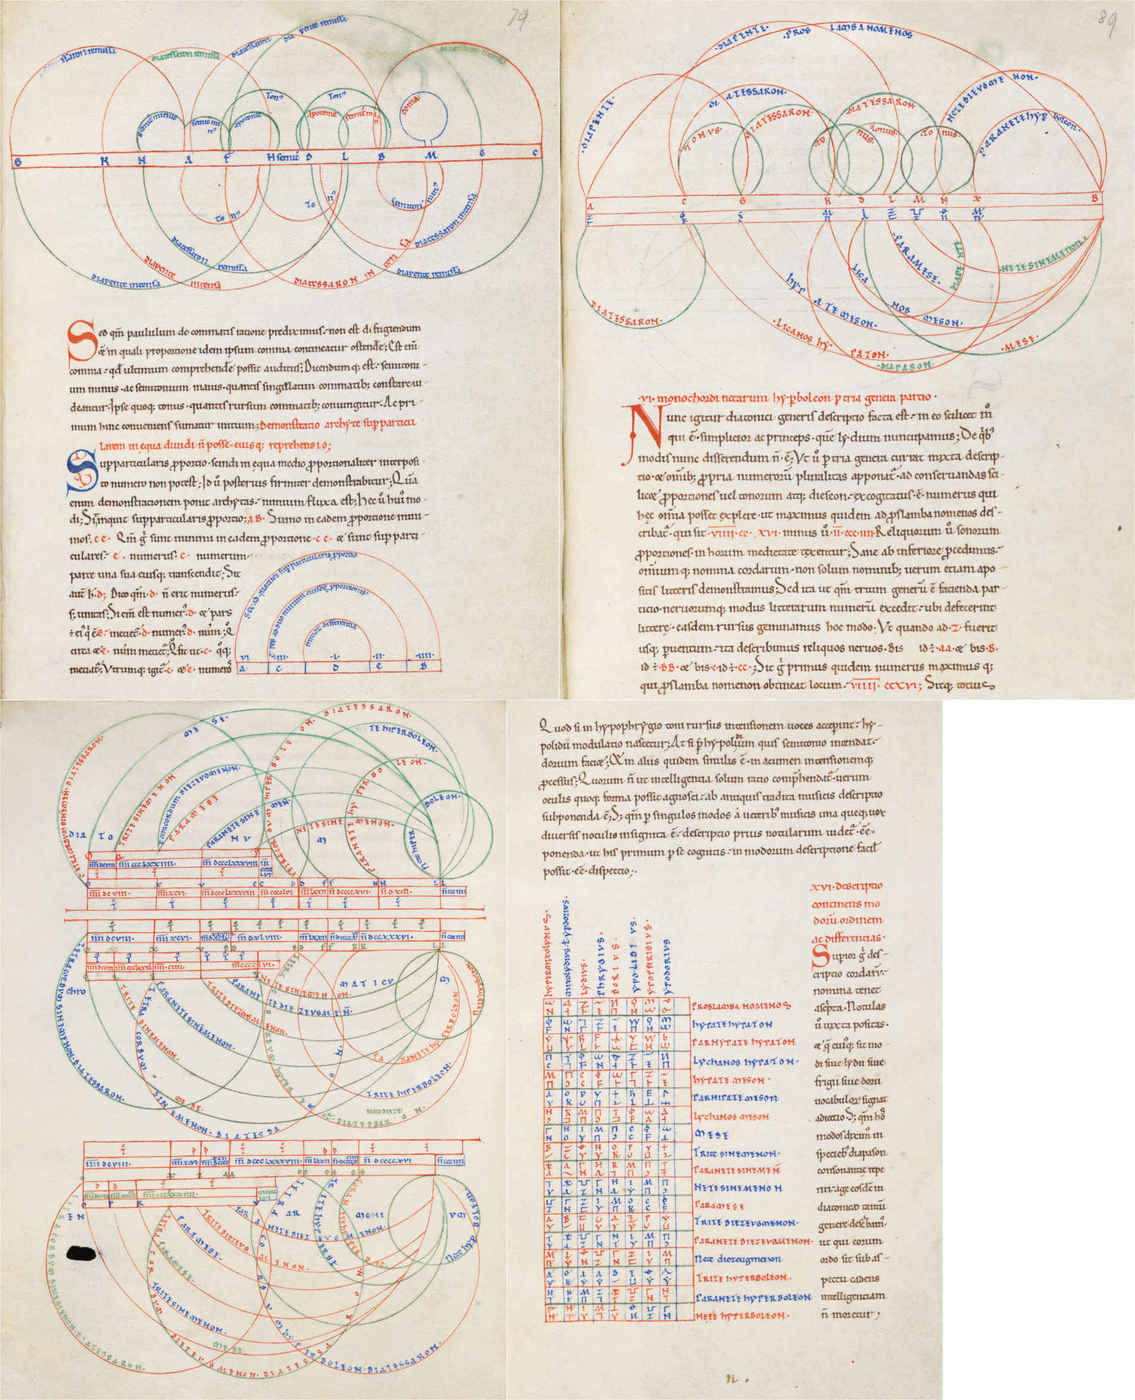 VadSlg Ms. 296 (1100s manuscript of Boethius’s De arithmetica/_De institutione musica): “The polychrome schematic illustrations in this 12th century manuscript are particularly carefully made.” Indeed. This image combines pages 79/89/93/99, which show off the diagrams, tables, dropcaps, and rubricated text employed in the discussion of music theory & multiplication.